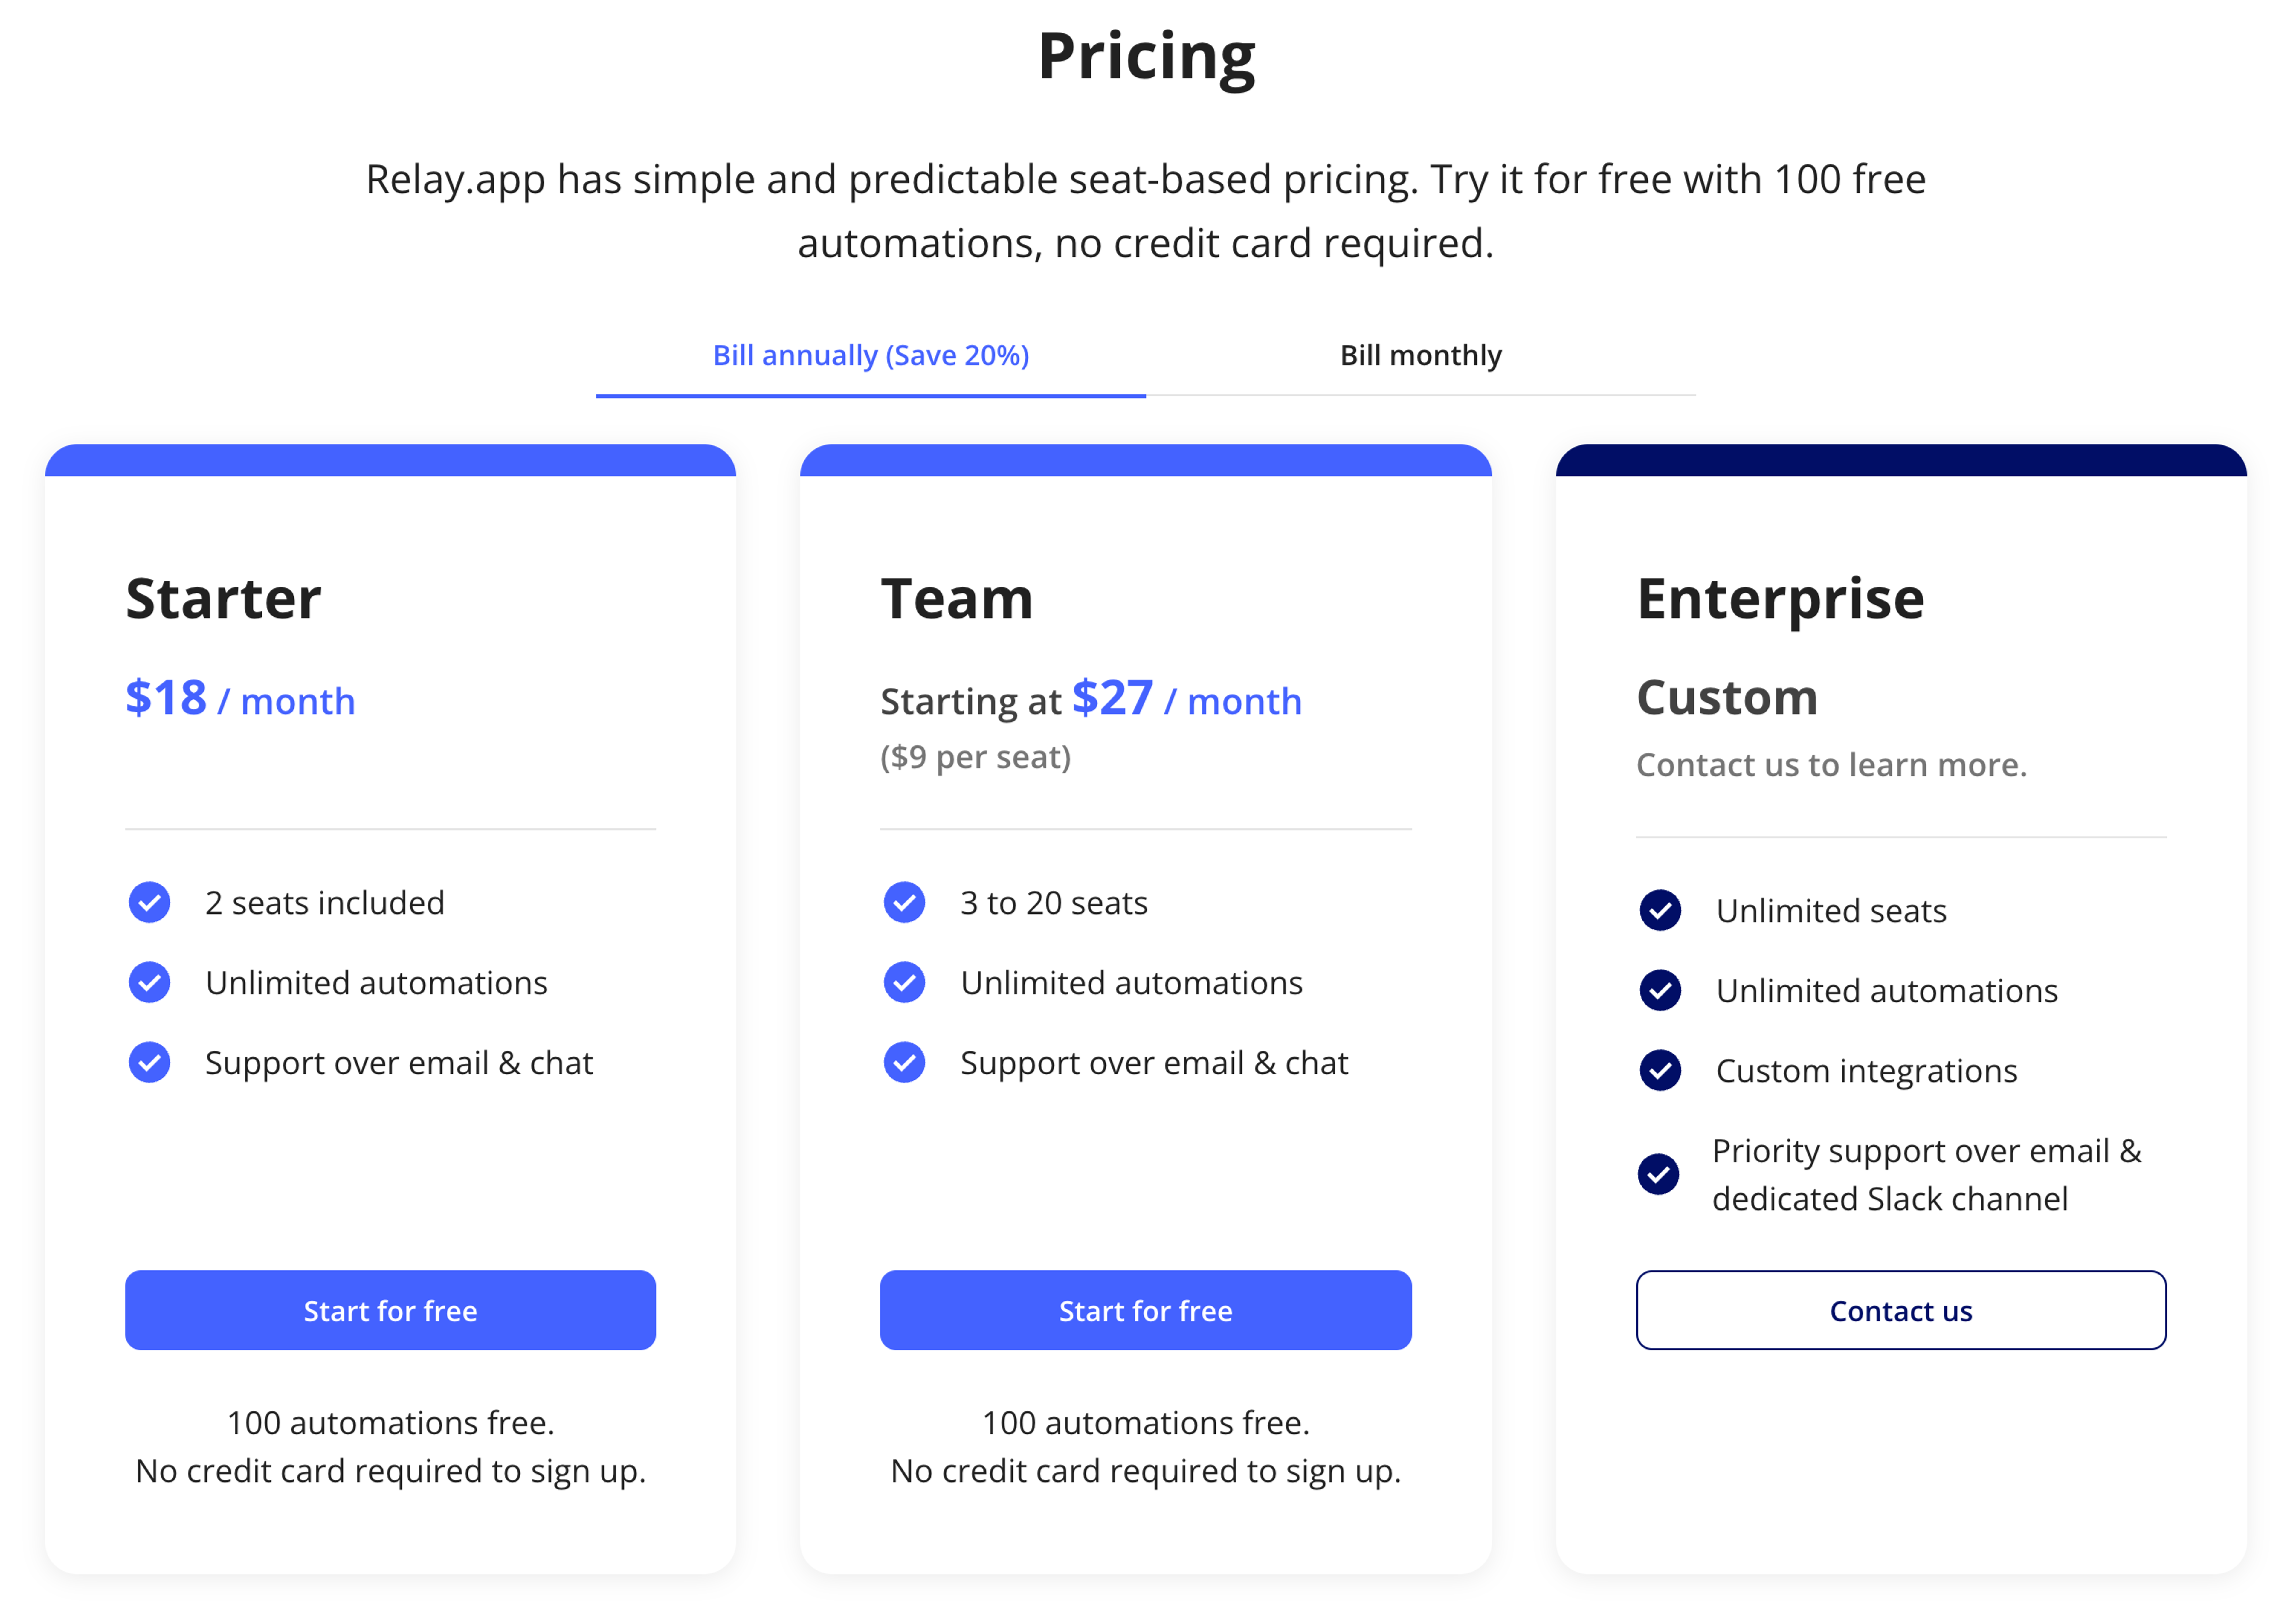 Relay.app pricing